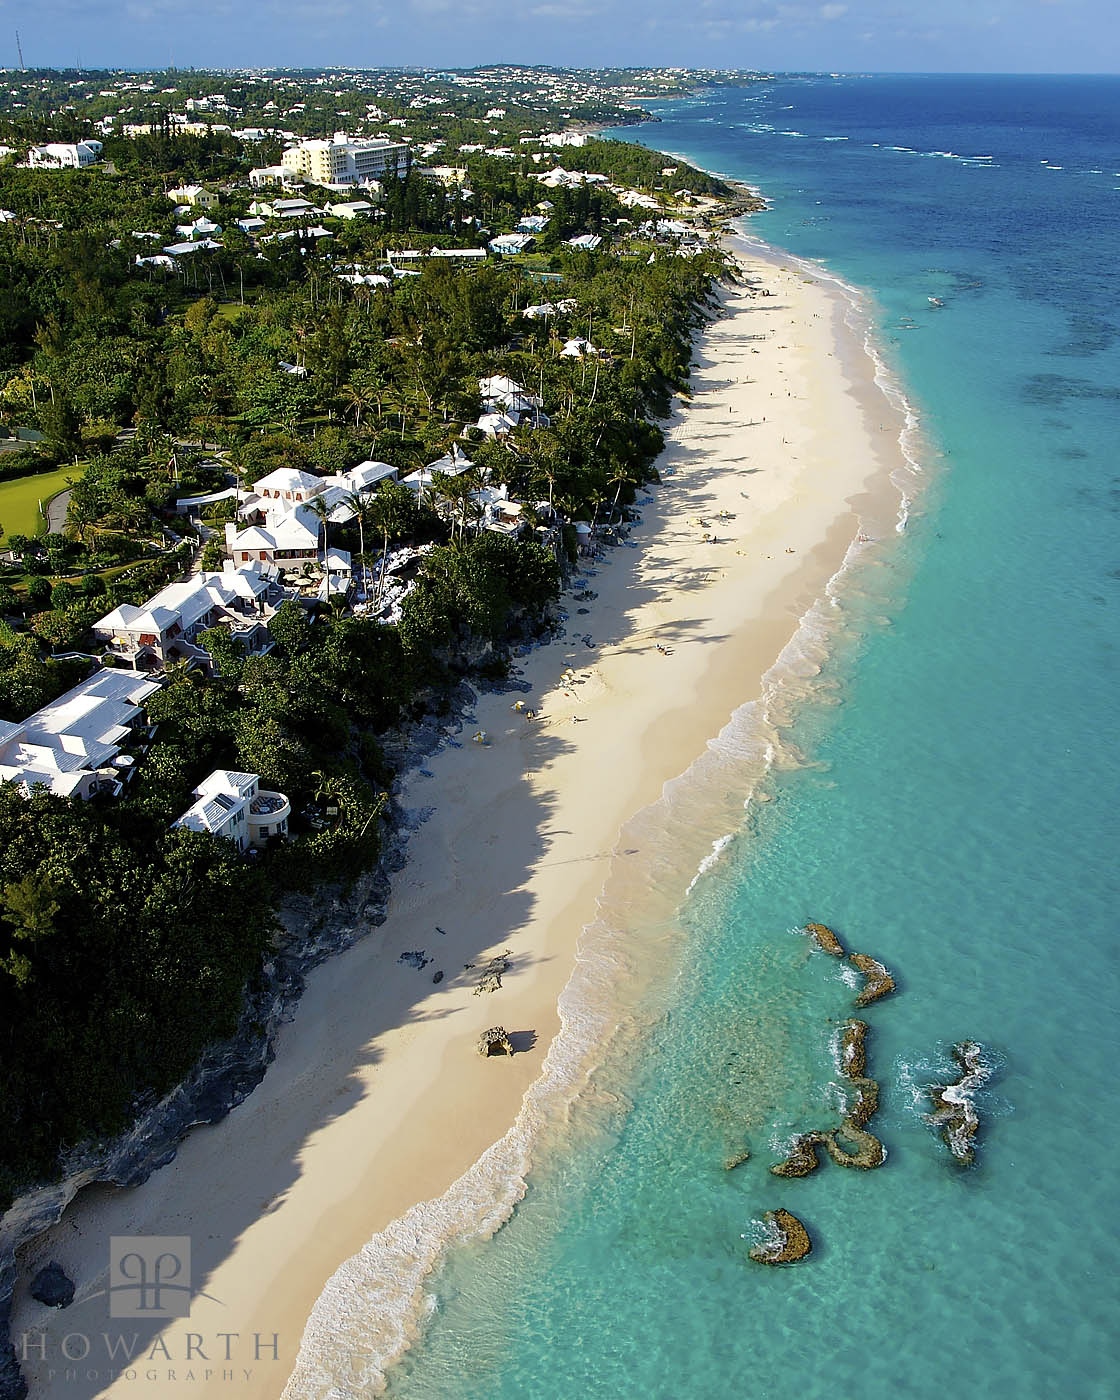 Elbow Beach with Coral Beach Club in the foreground